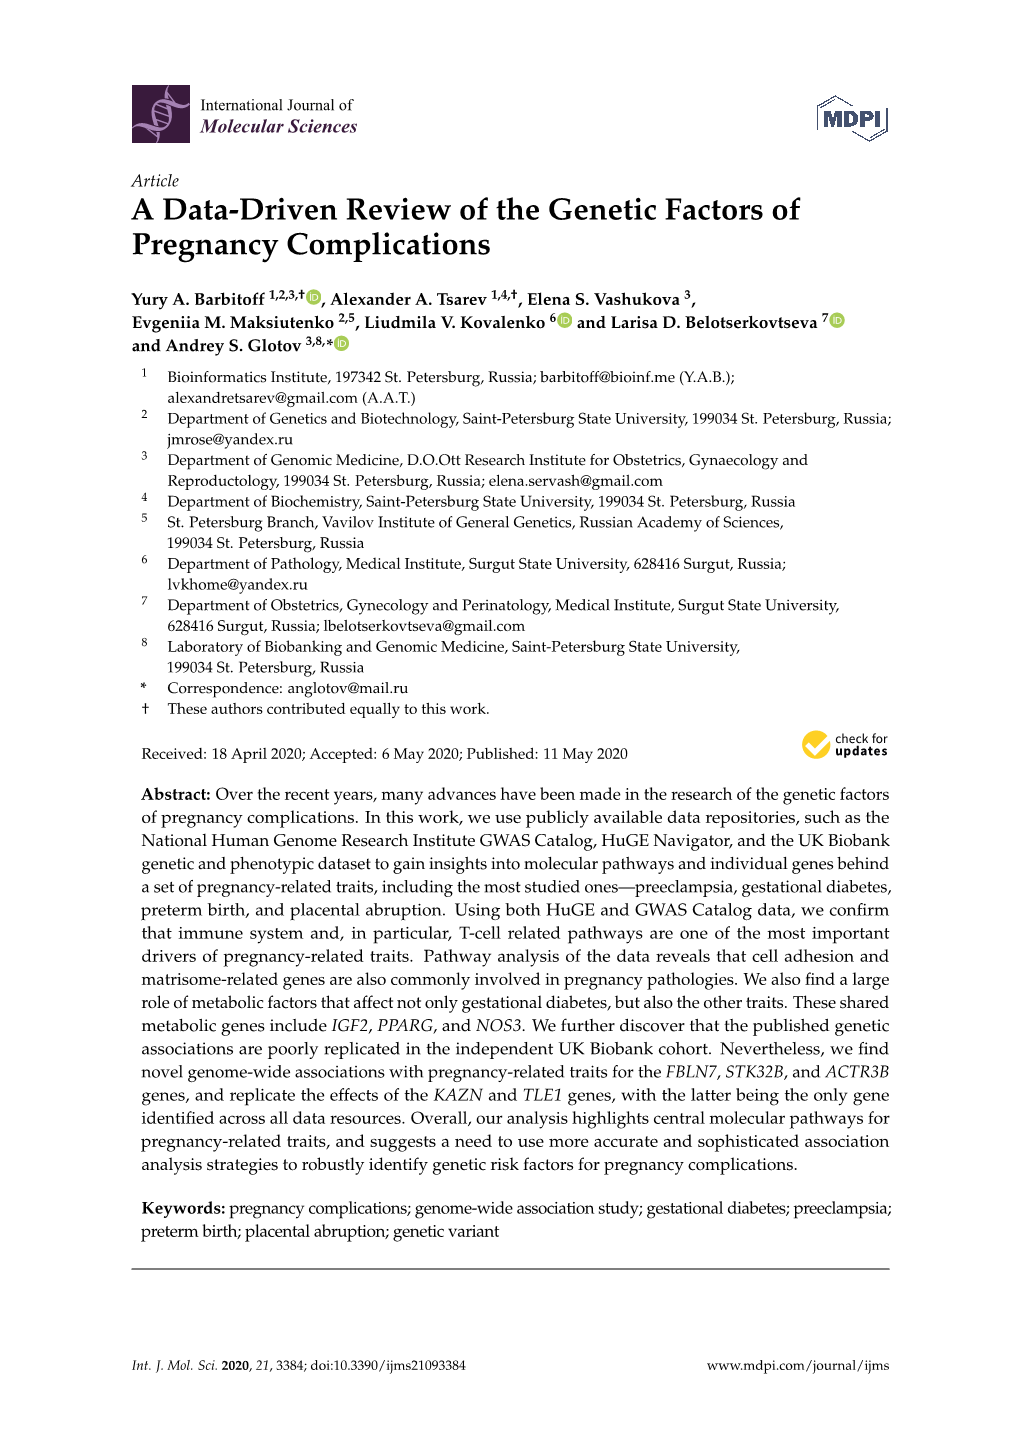 A Data-Driven Review of the Genetic Factors of Pregnancy Complications